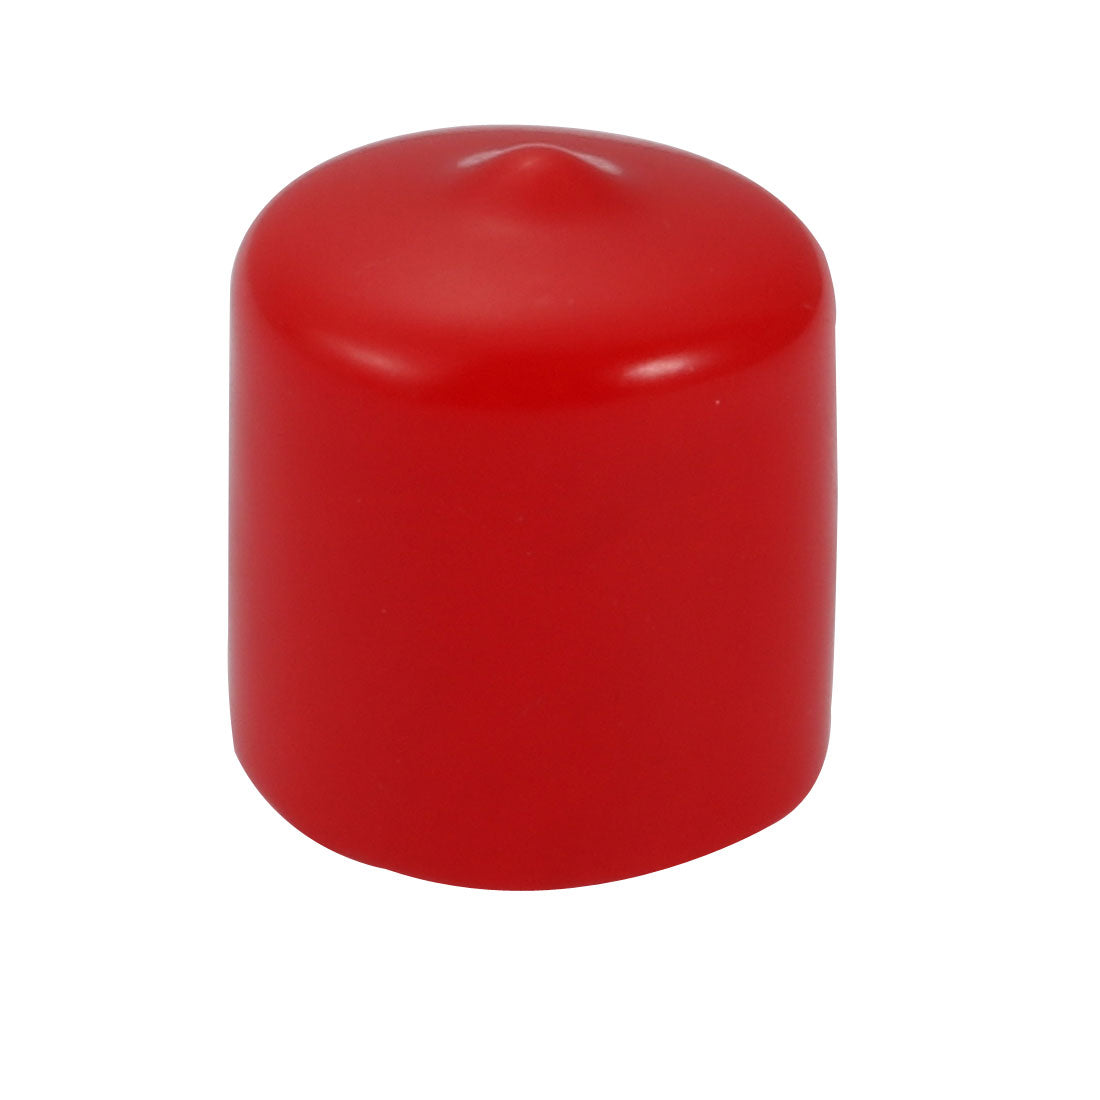 uxcell Uxcell 50pcs 22mm Dia Red Rubber Thread Round Cabinet Chair Leg Insert Cover Protector